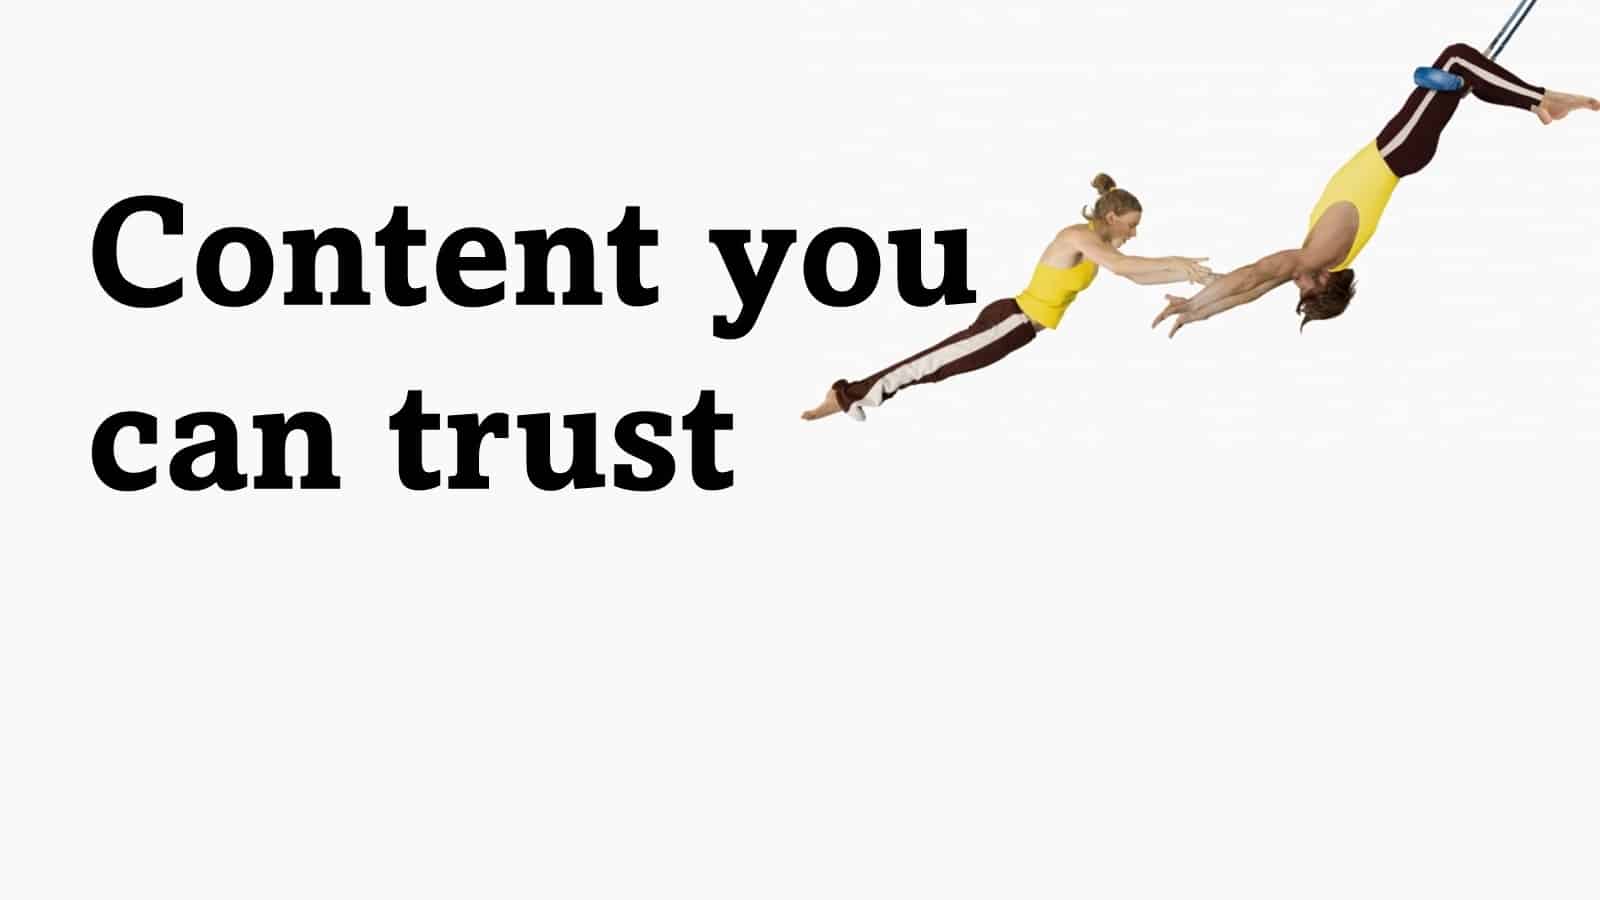 Content you can trust